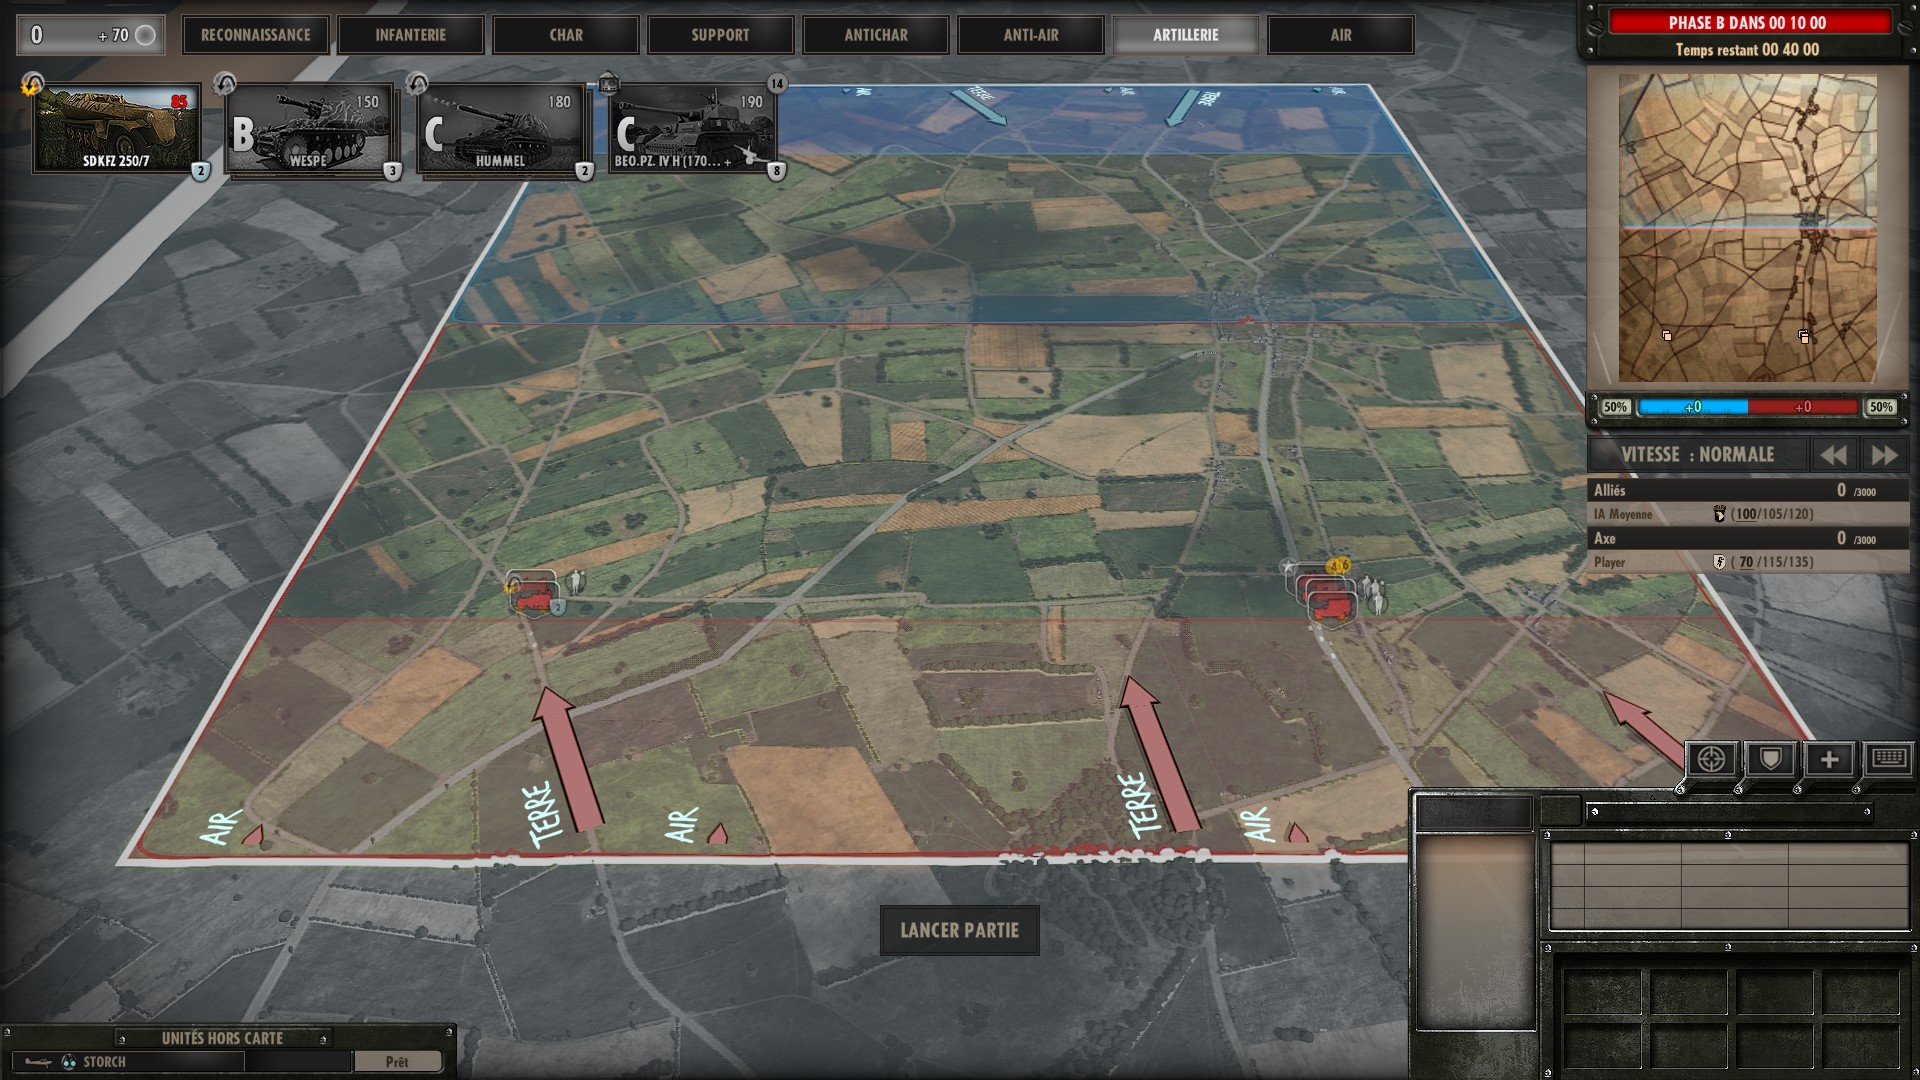 Steel division normandy 44